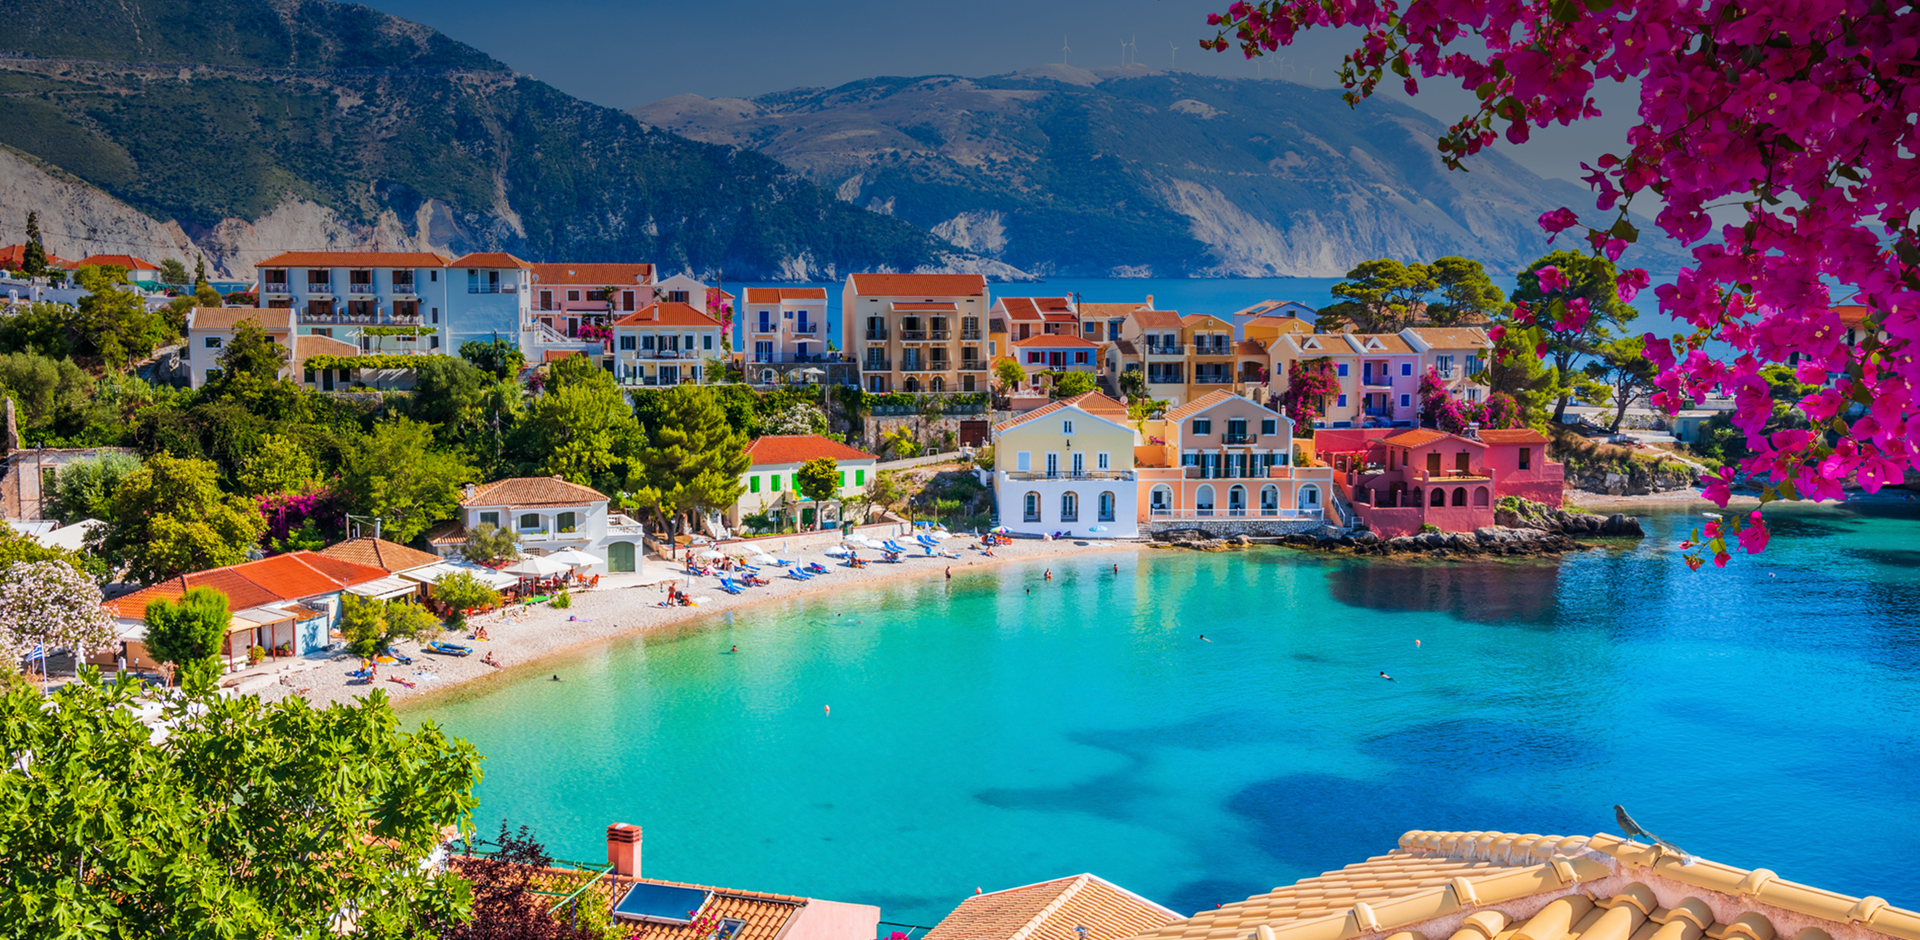 View of colourful houses with hills behind them, small beach with clear water in front and a tree with blooming pink flowers overhanding from the top of the image, Village of Assos in Kefalonia, Greece.